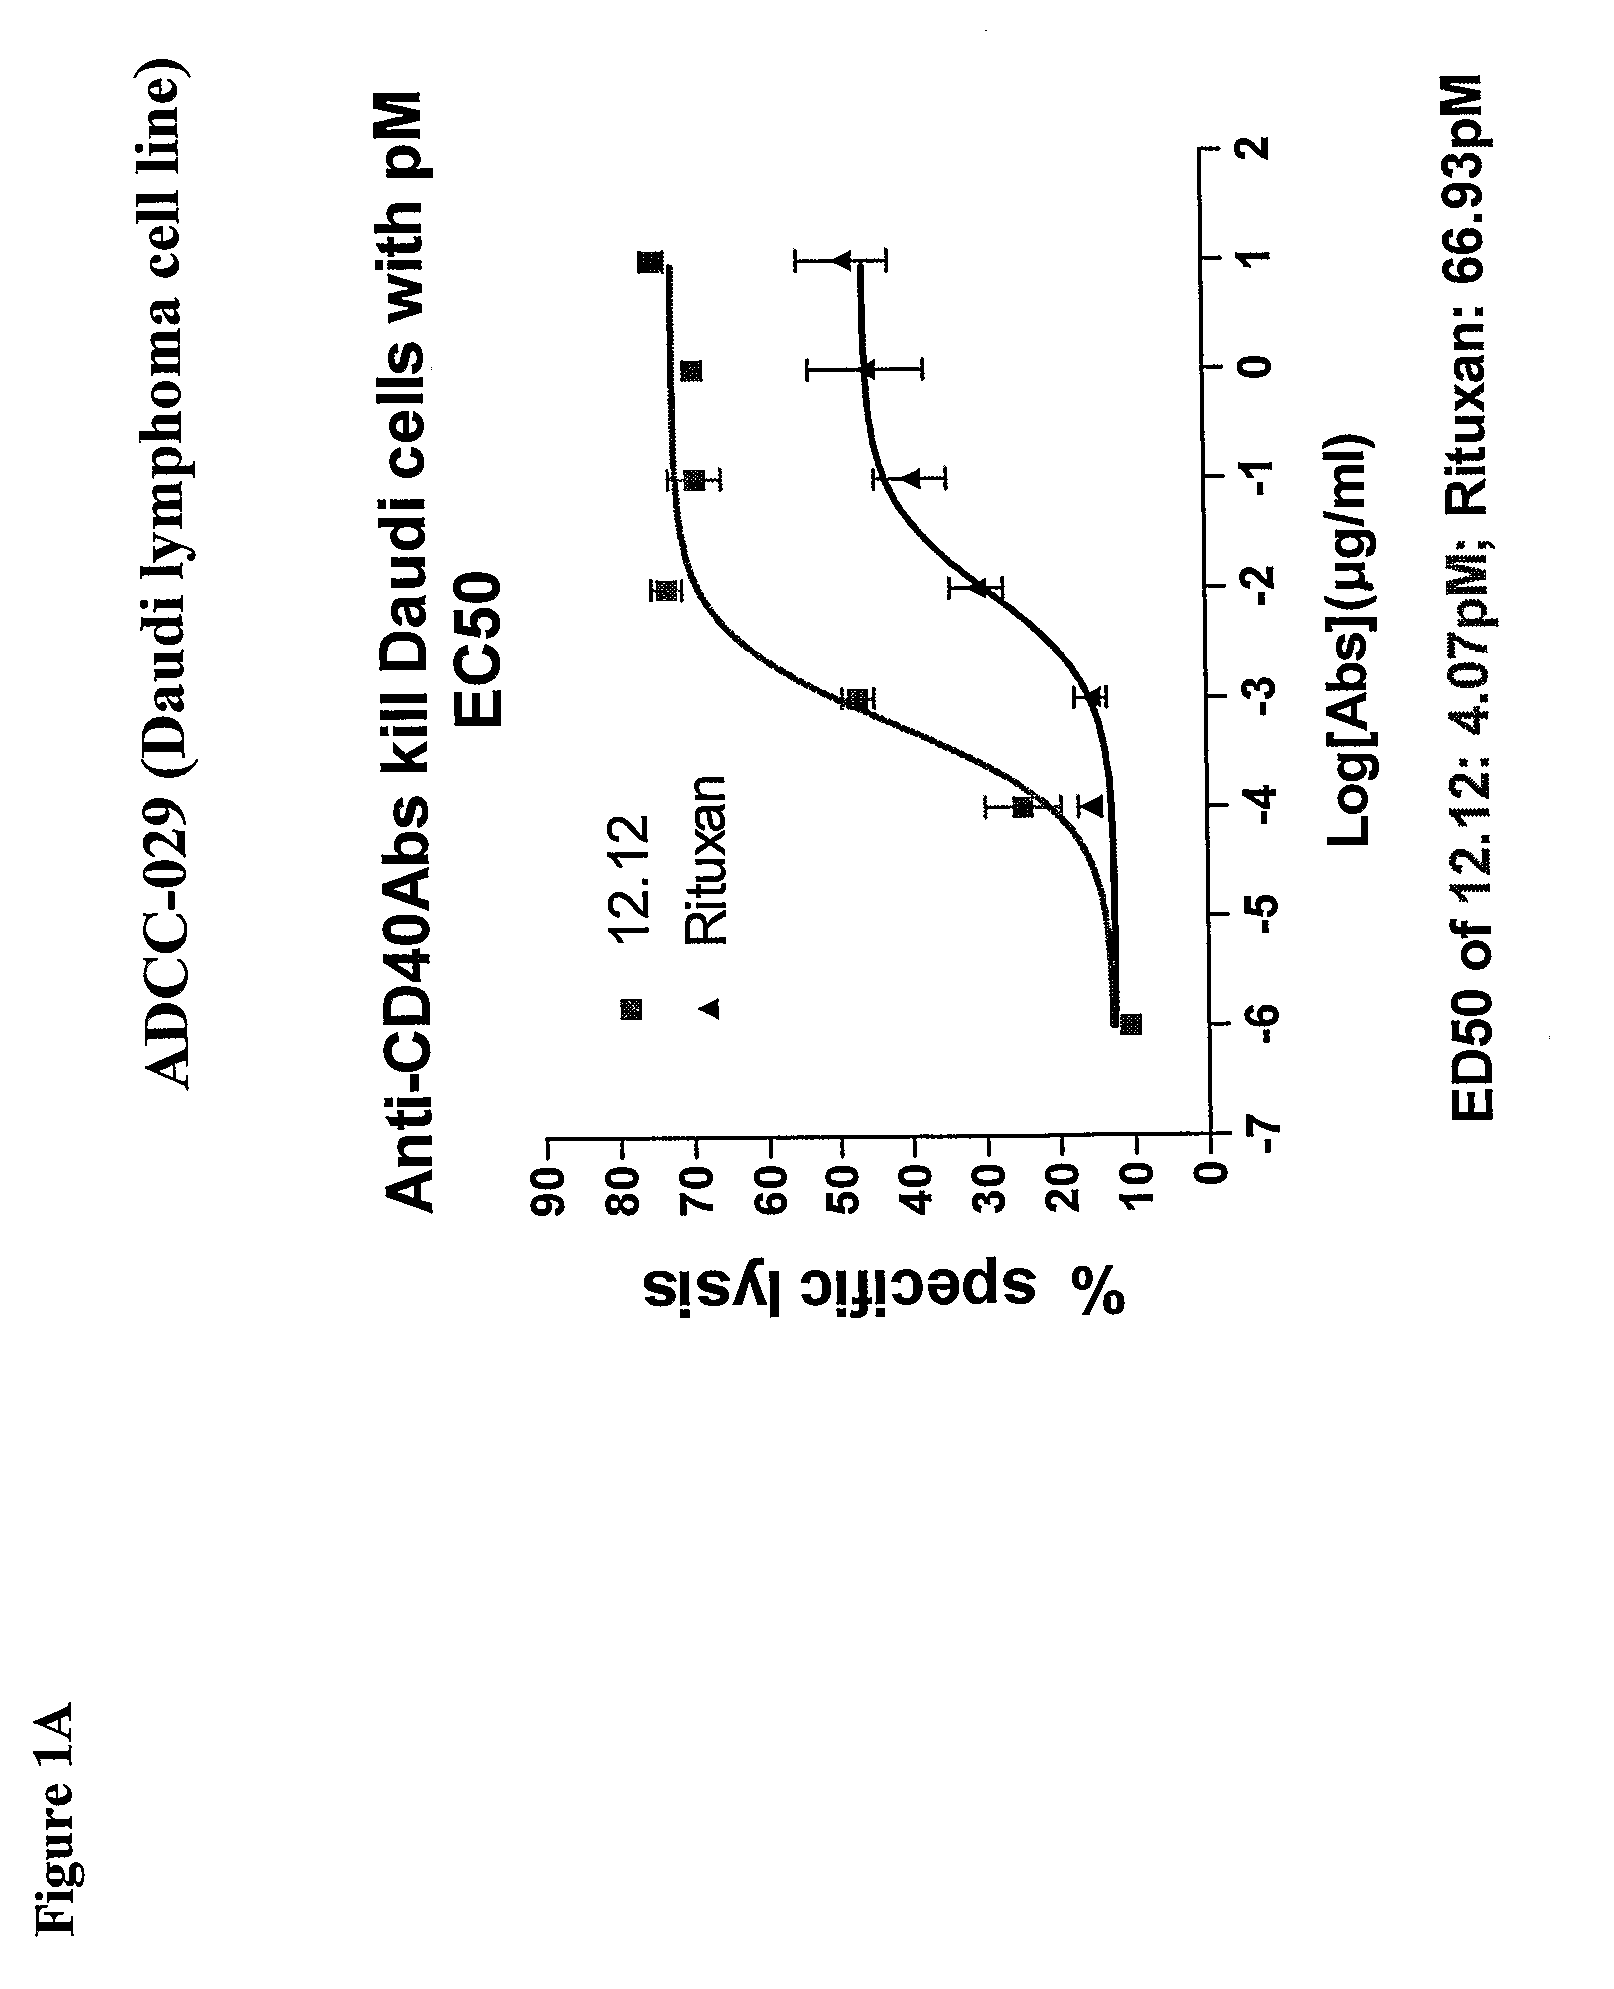 Treatment of cancer or pre-malignant conditions using anti-CD40 antibodies